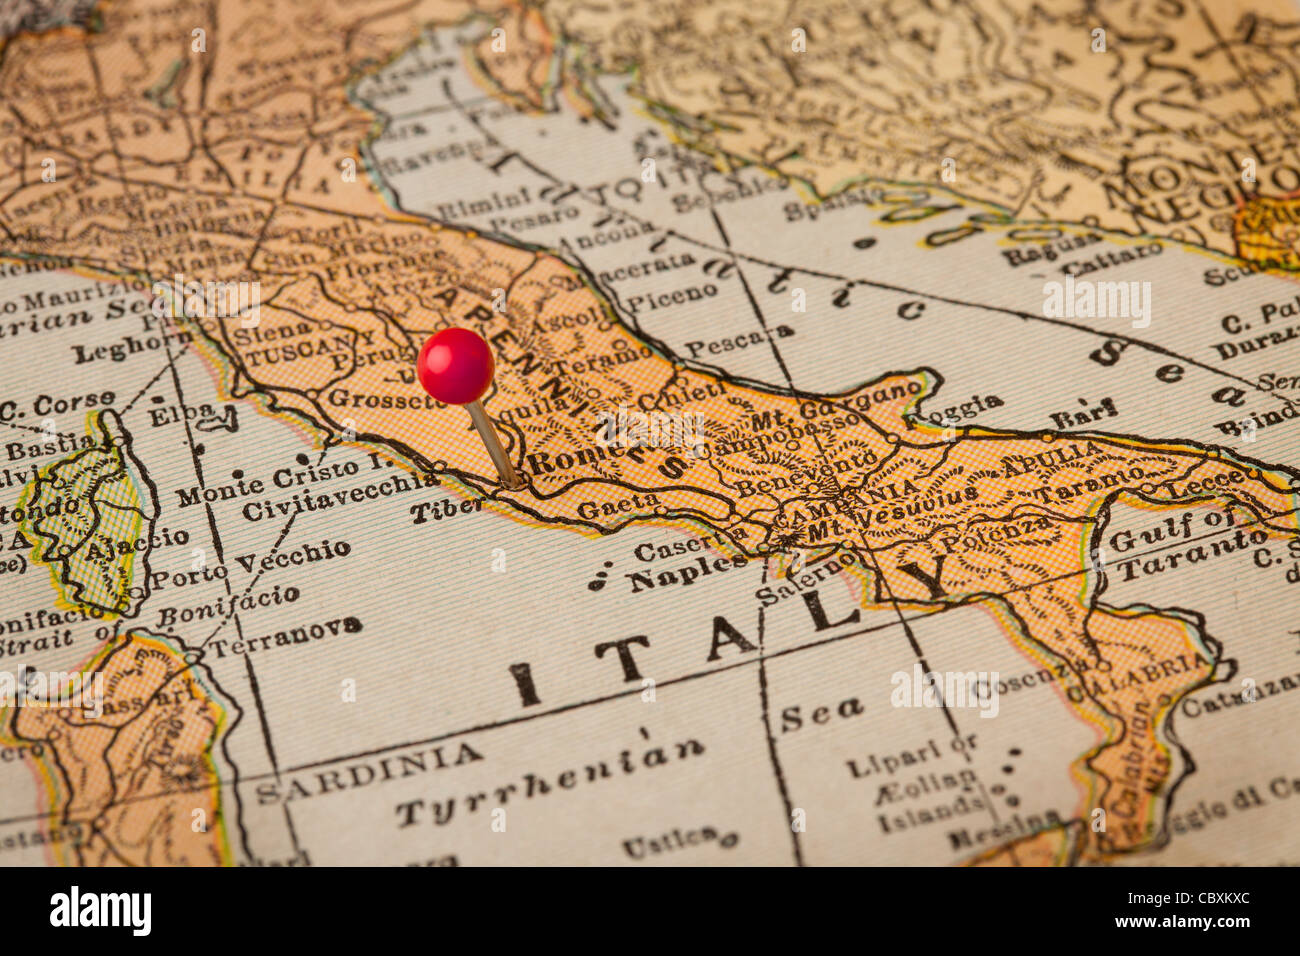 Italy vintage 1920s map (printed in 1926 - copyrights expired) with a red pushpin on Rome, selective focus Stock Photo